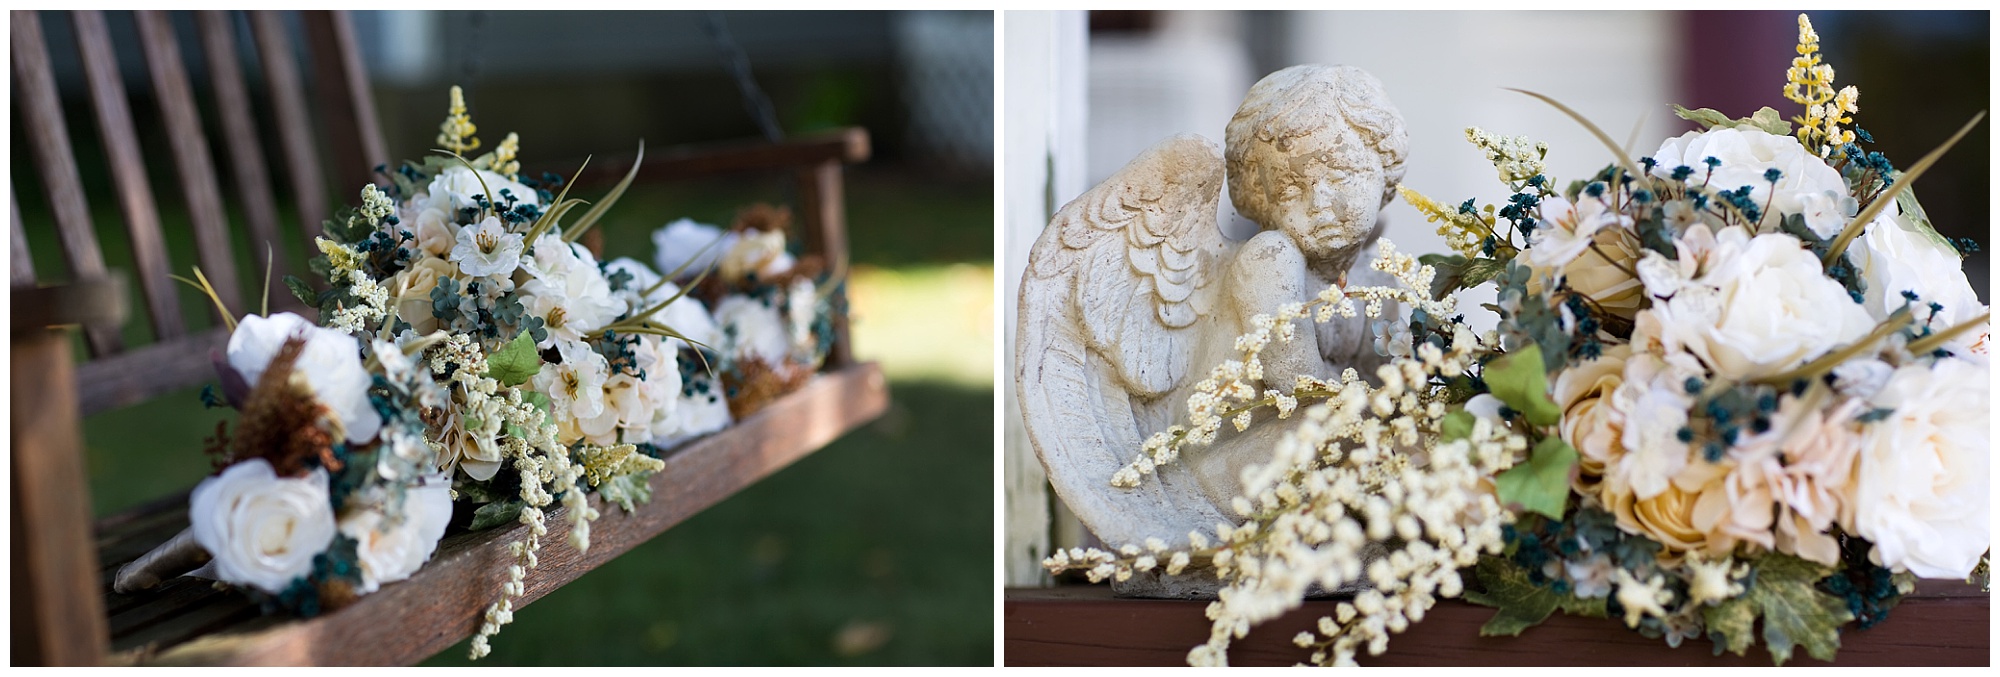 Photos of a bride's bouquet on a bench and next to an angel statue